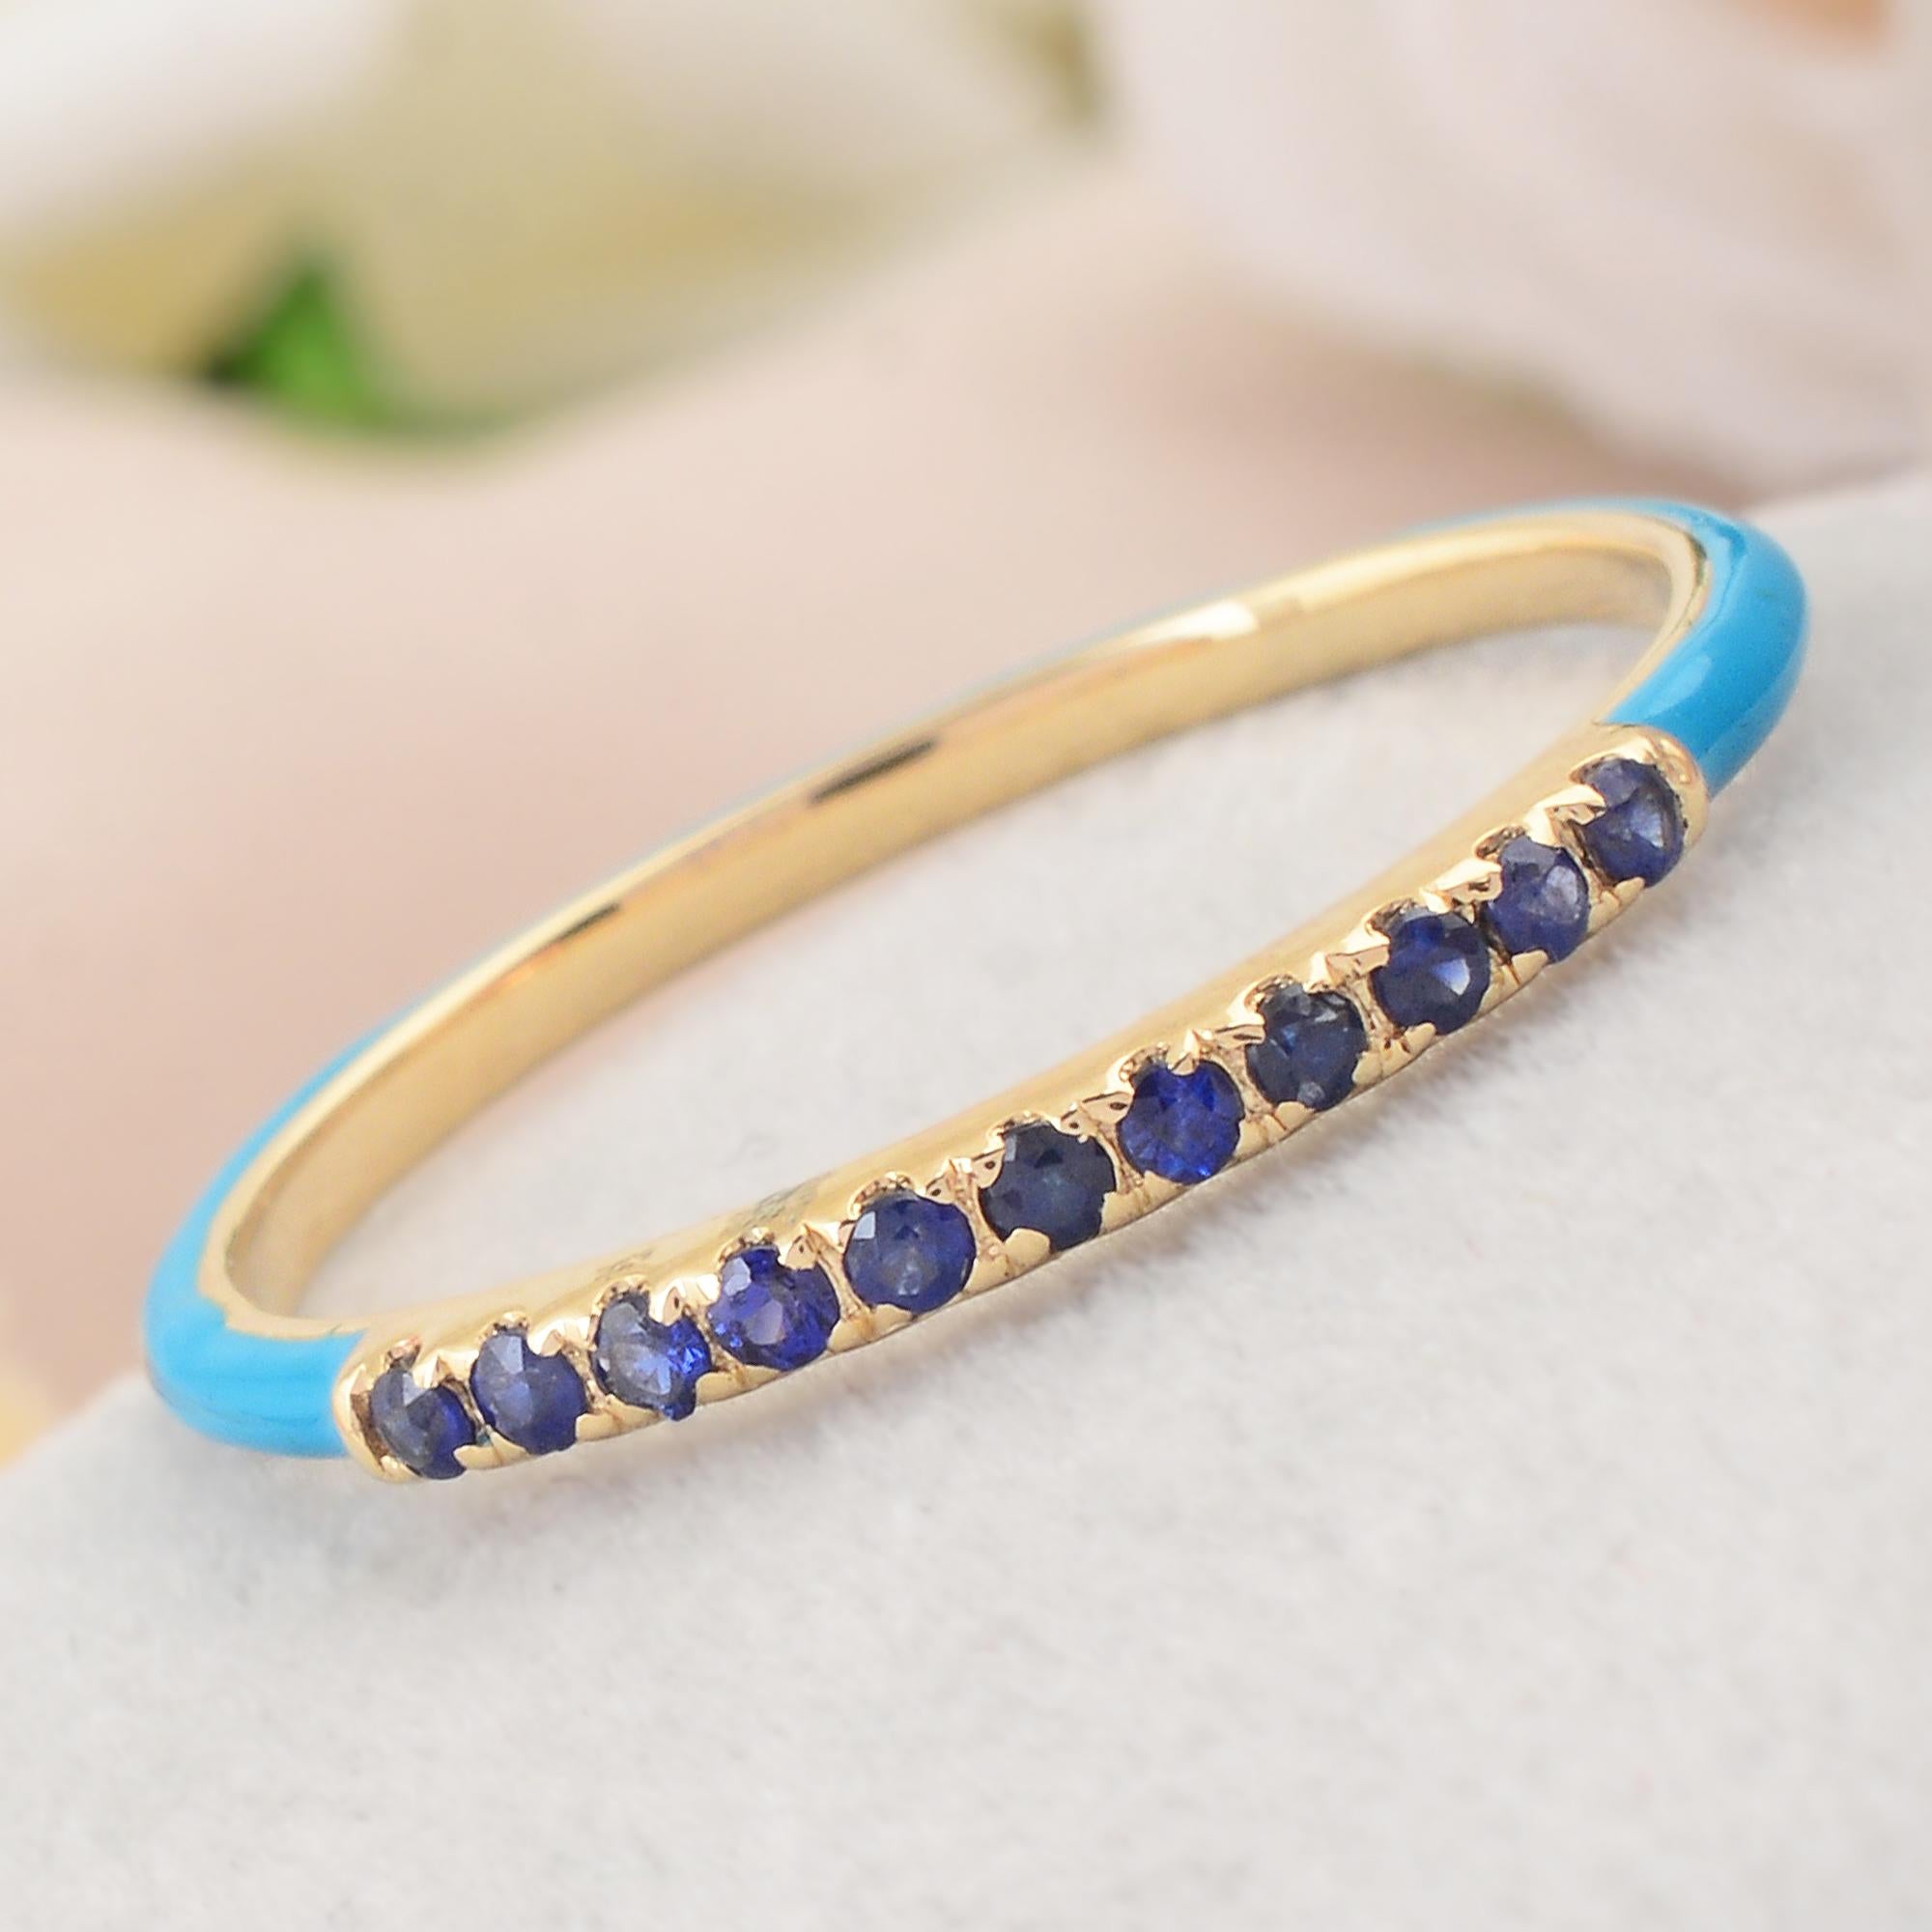 Real Blue Sapphire Gemstone Blue Enamel Half Eternity Band Ring 14Kt Yellow Gold For Sale 1